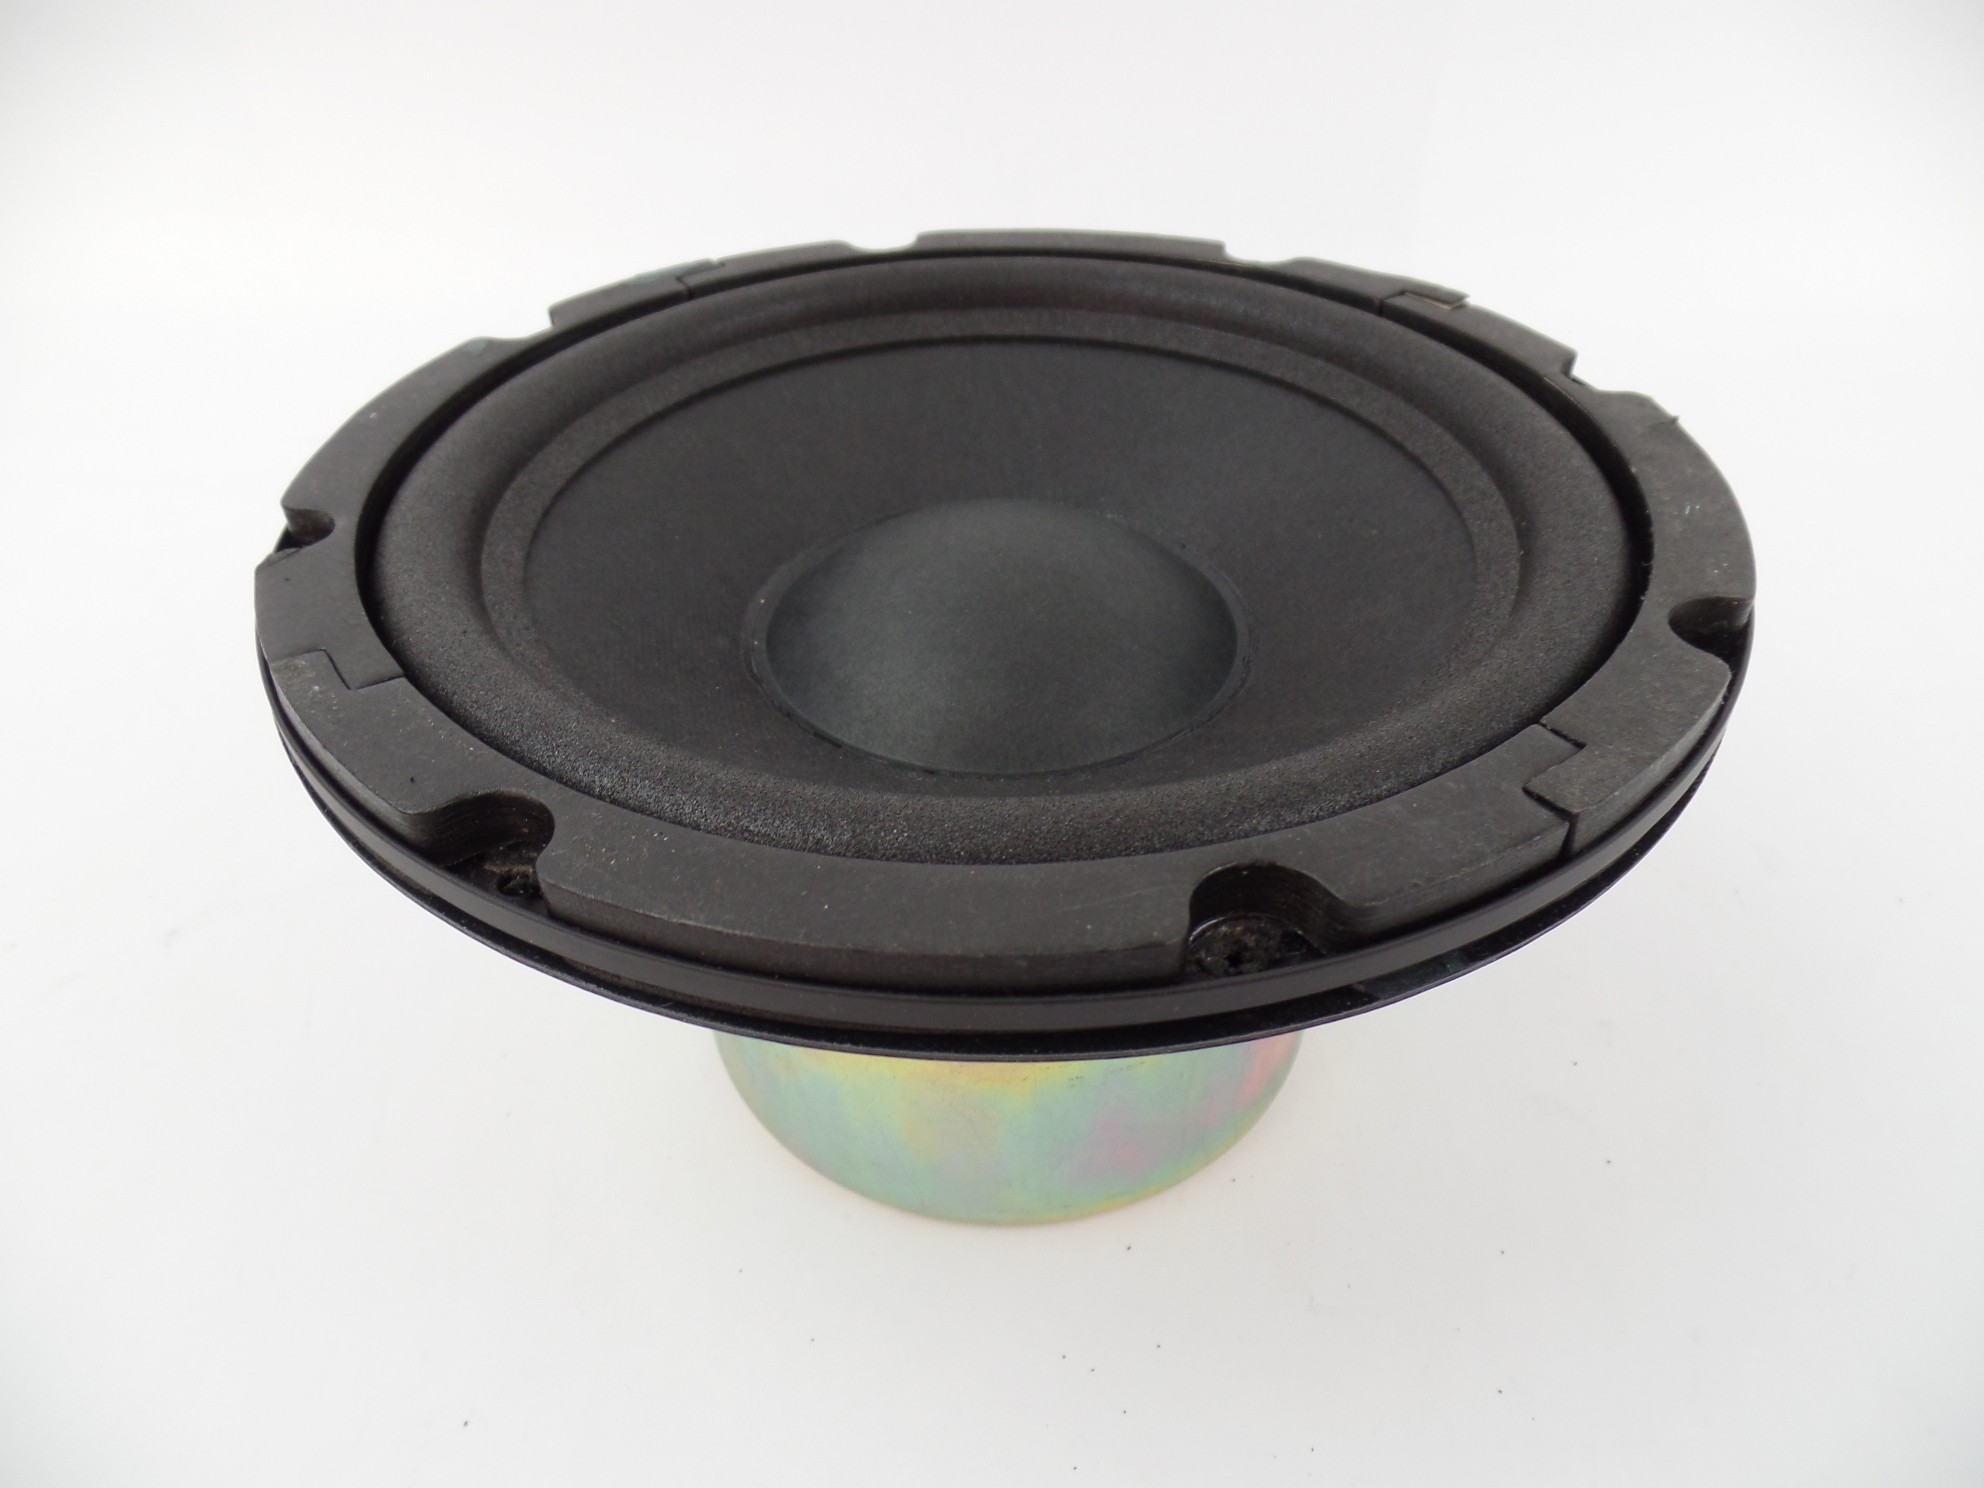 8" Speaker 1982A100 for Definitive Technology Pro Sub 60